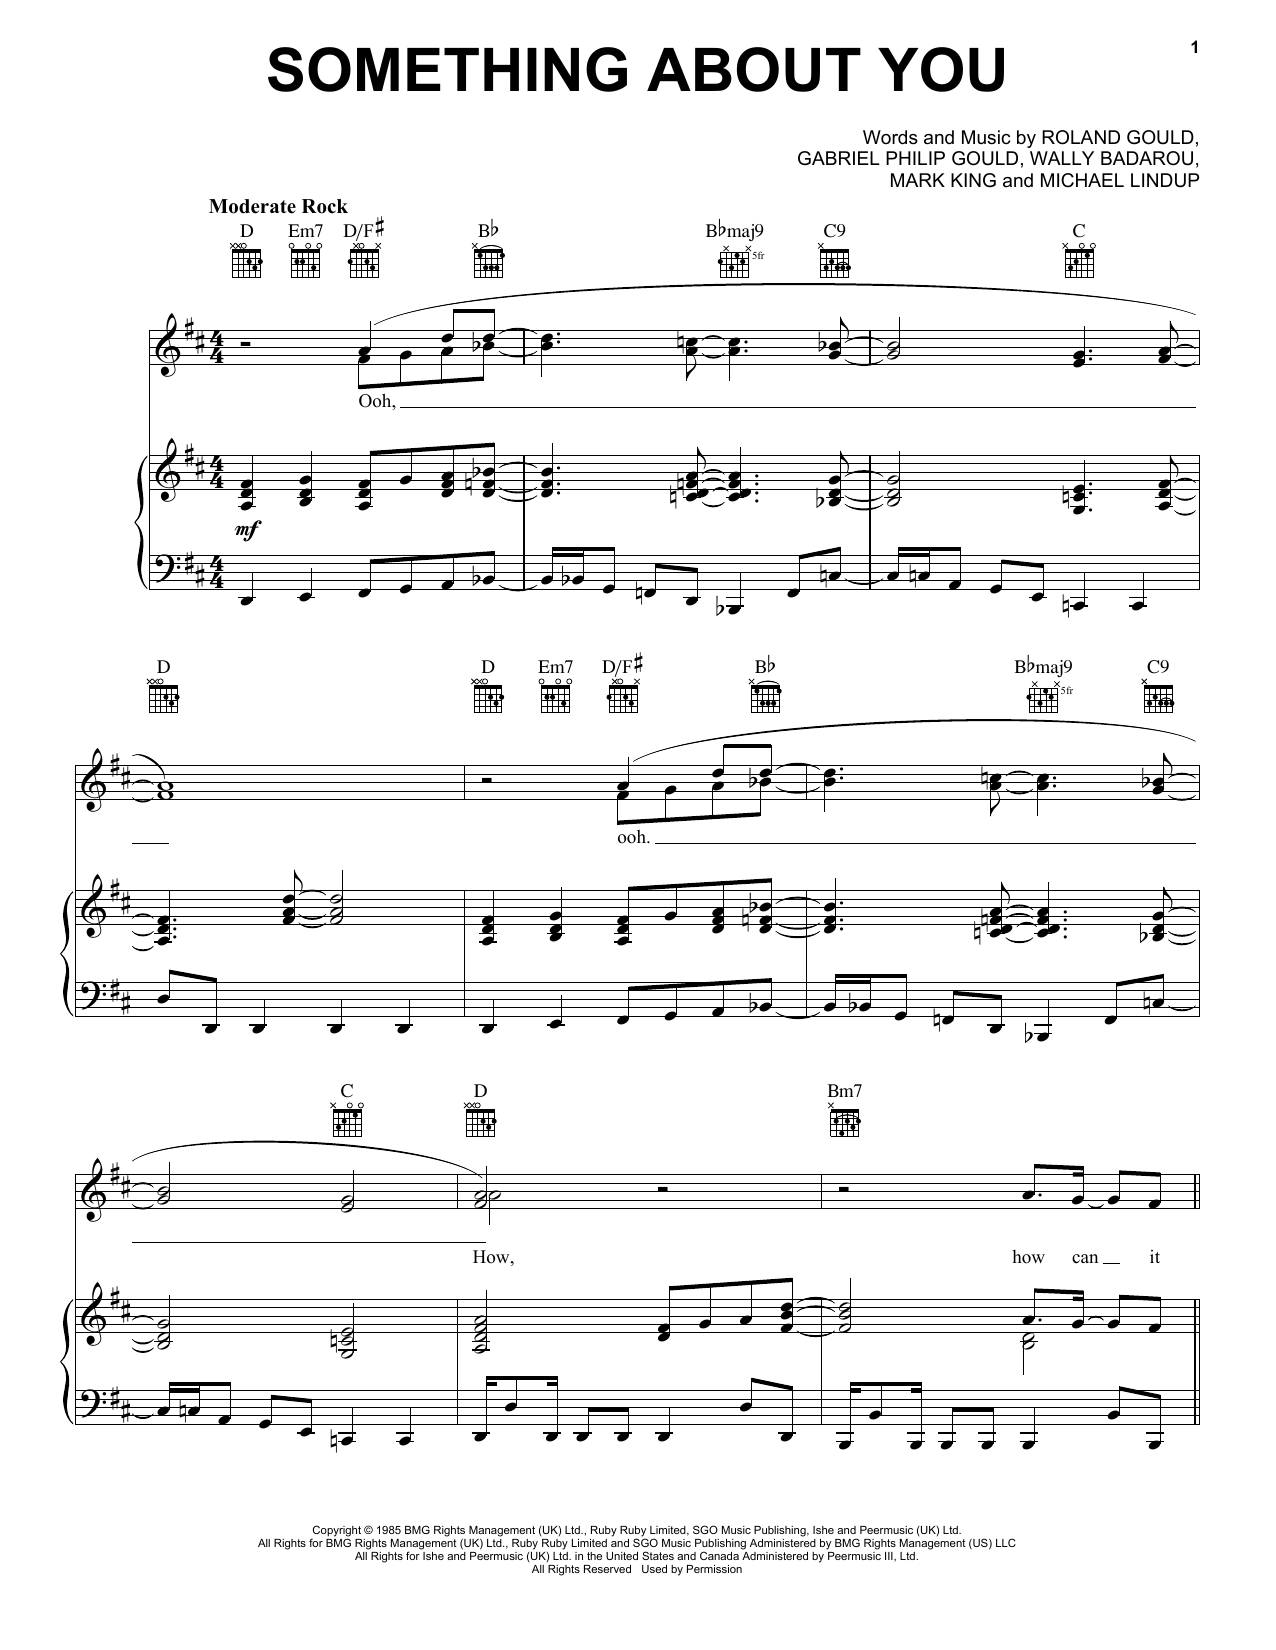 Download Level 42 Something About You Sheet Music